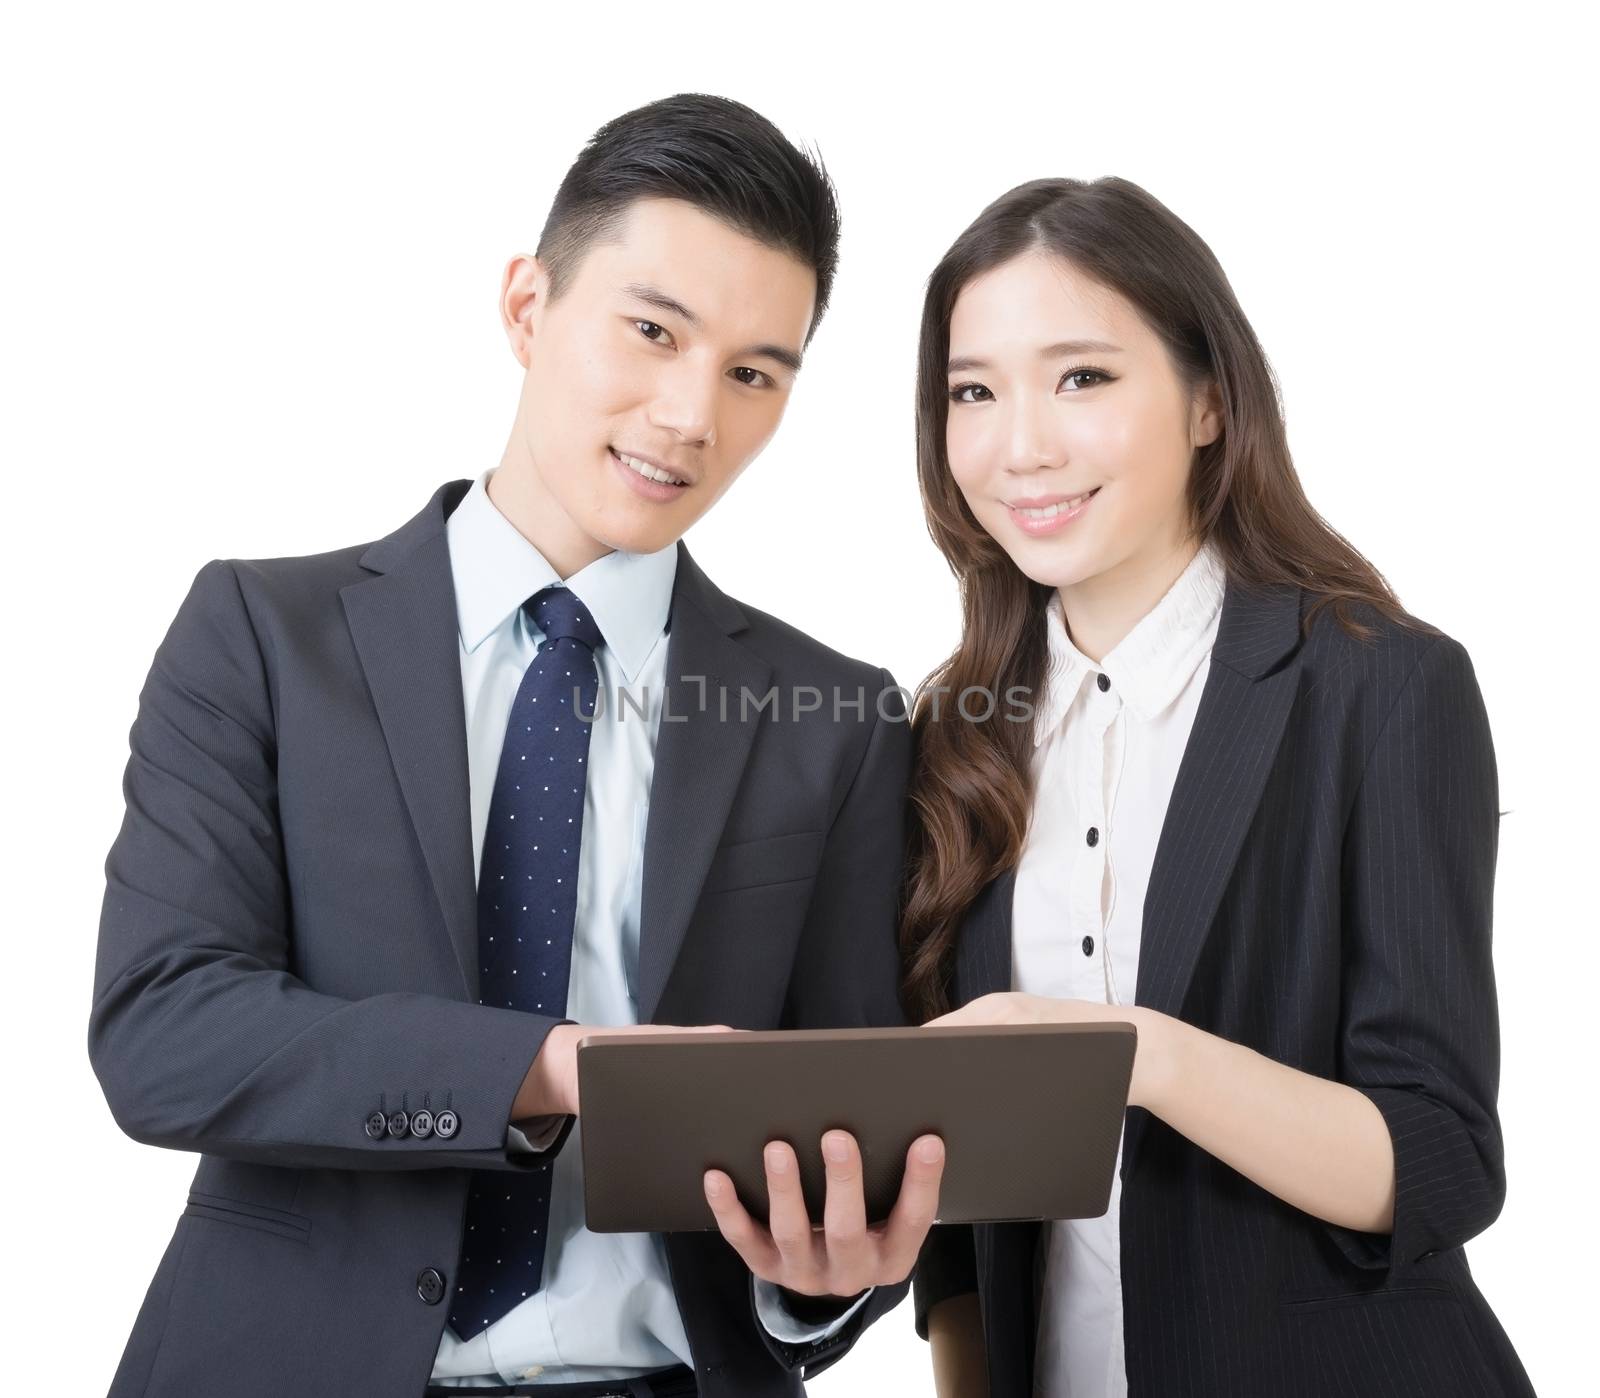 Business man and woman discuss, closeup portrait isolated on white background.